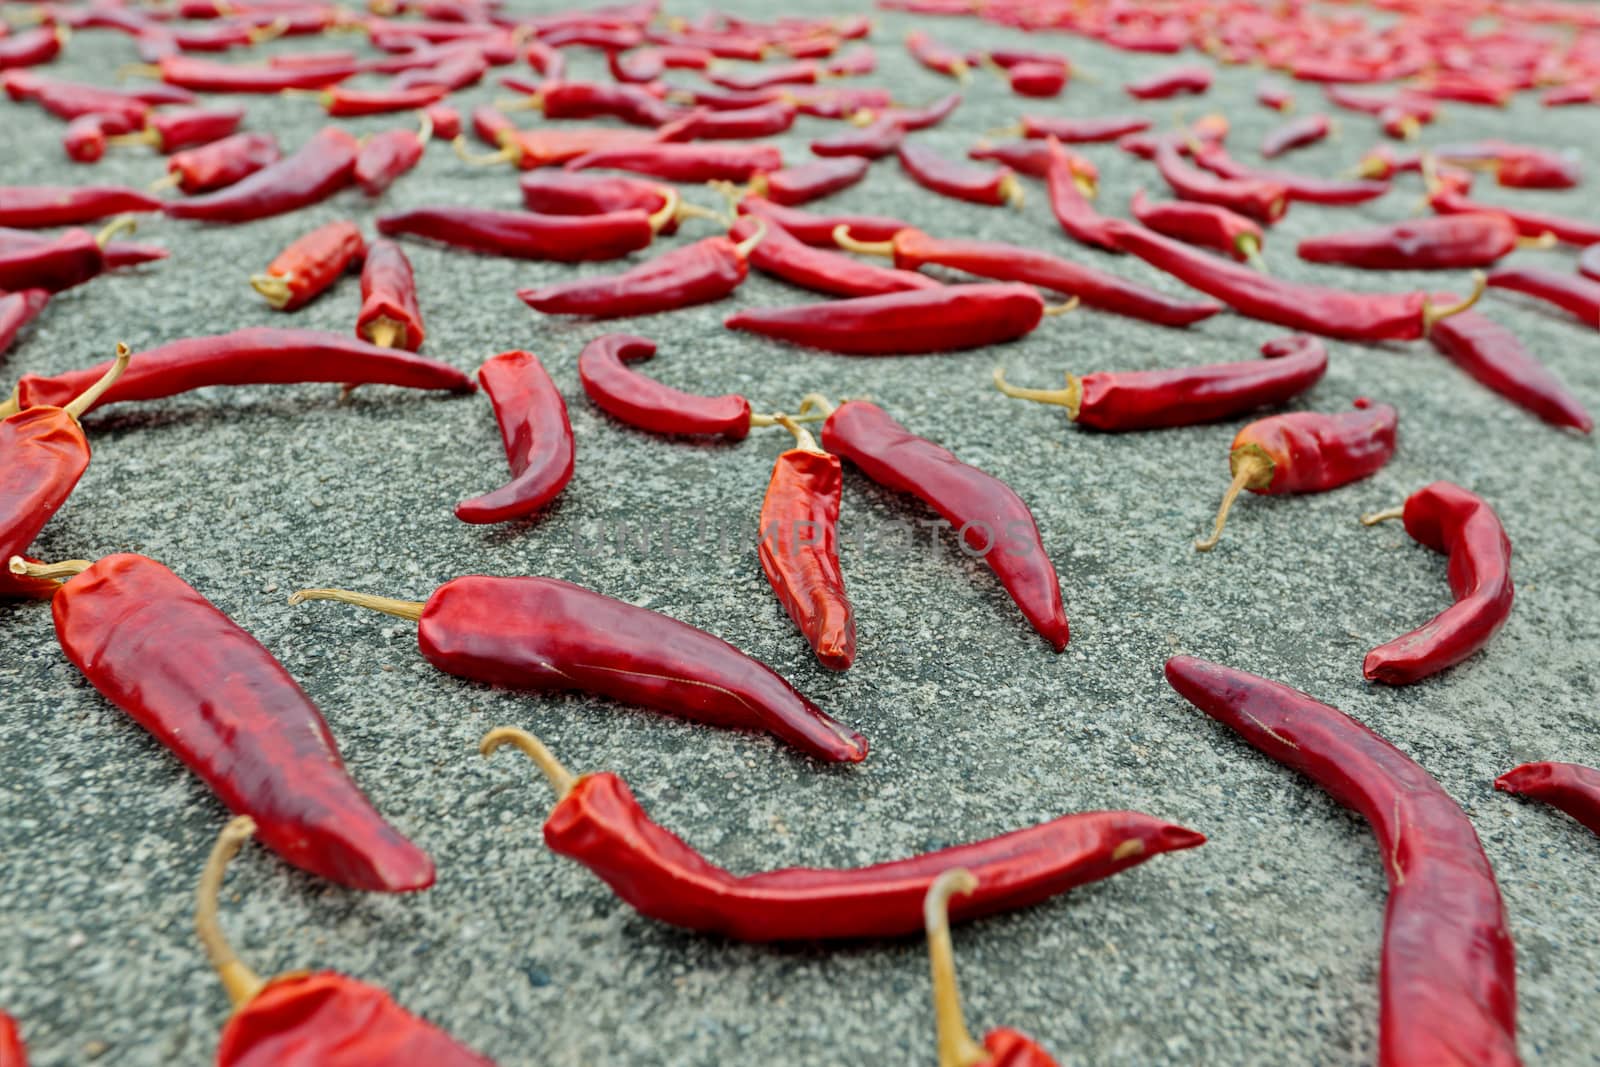 Many chili peppers drying on the ground